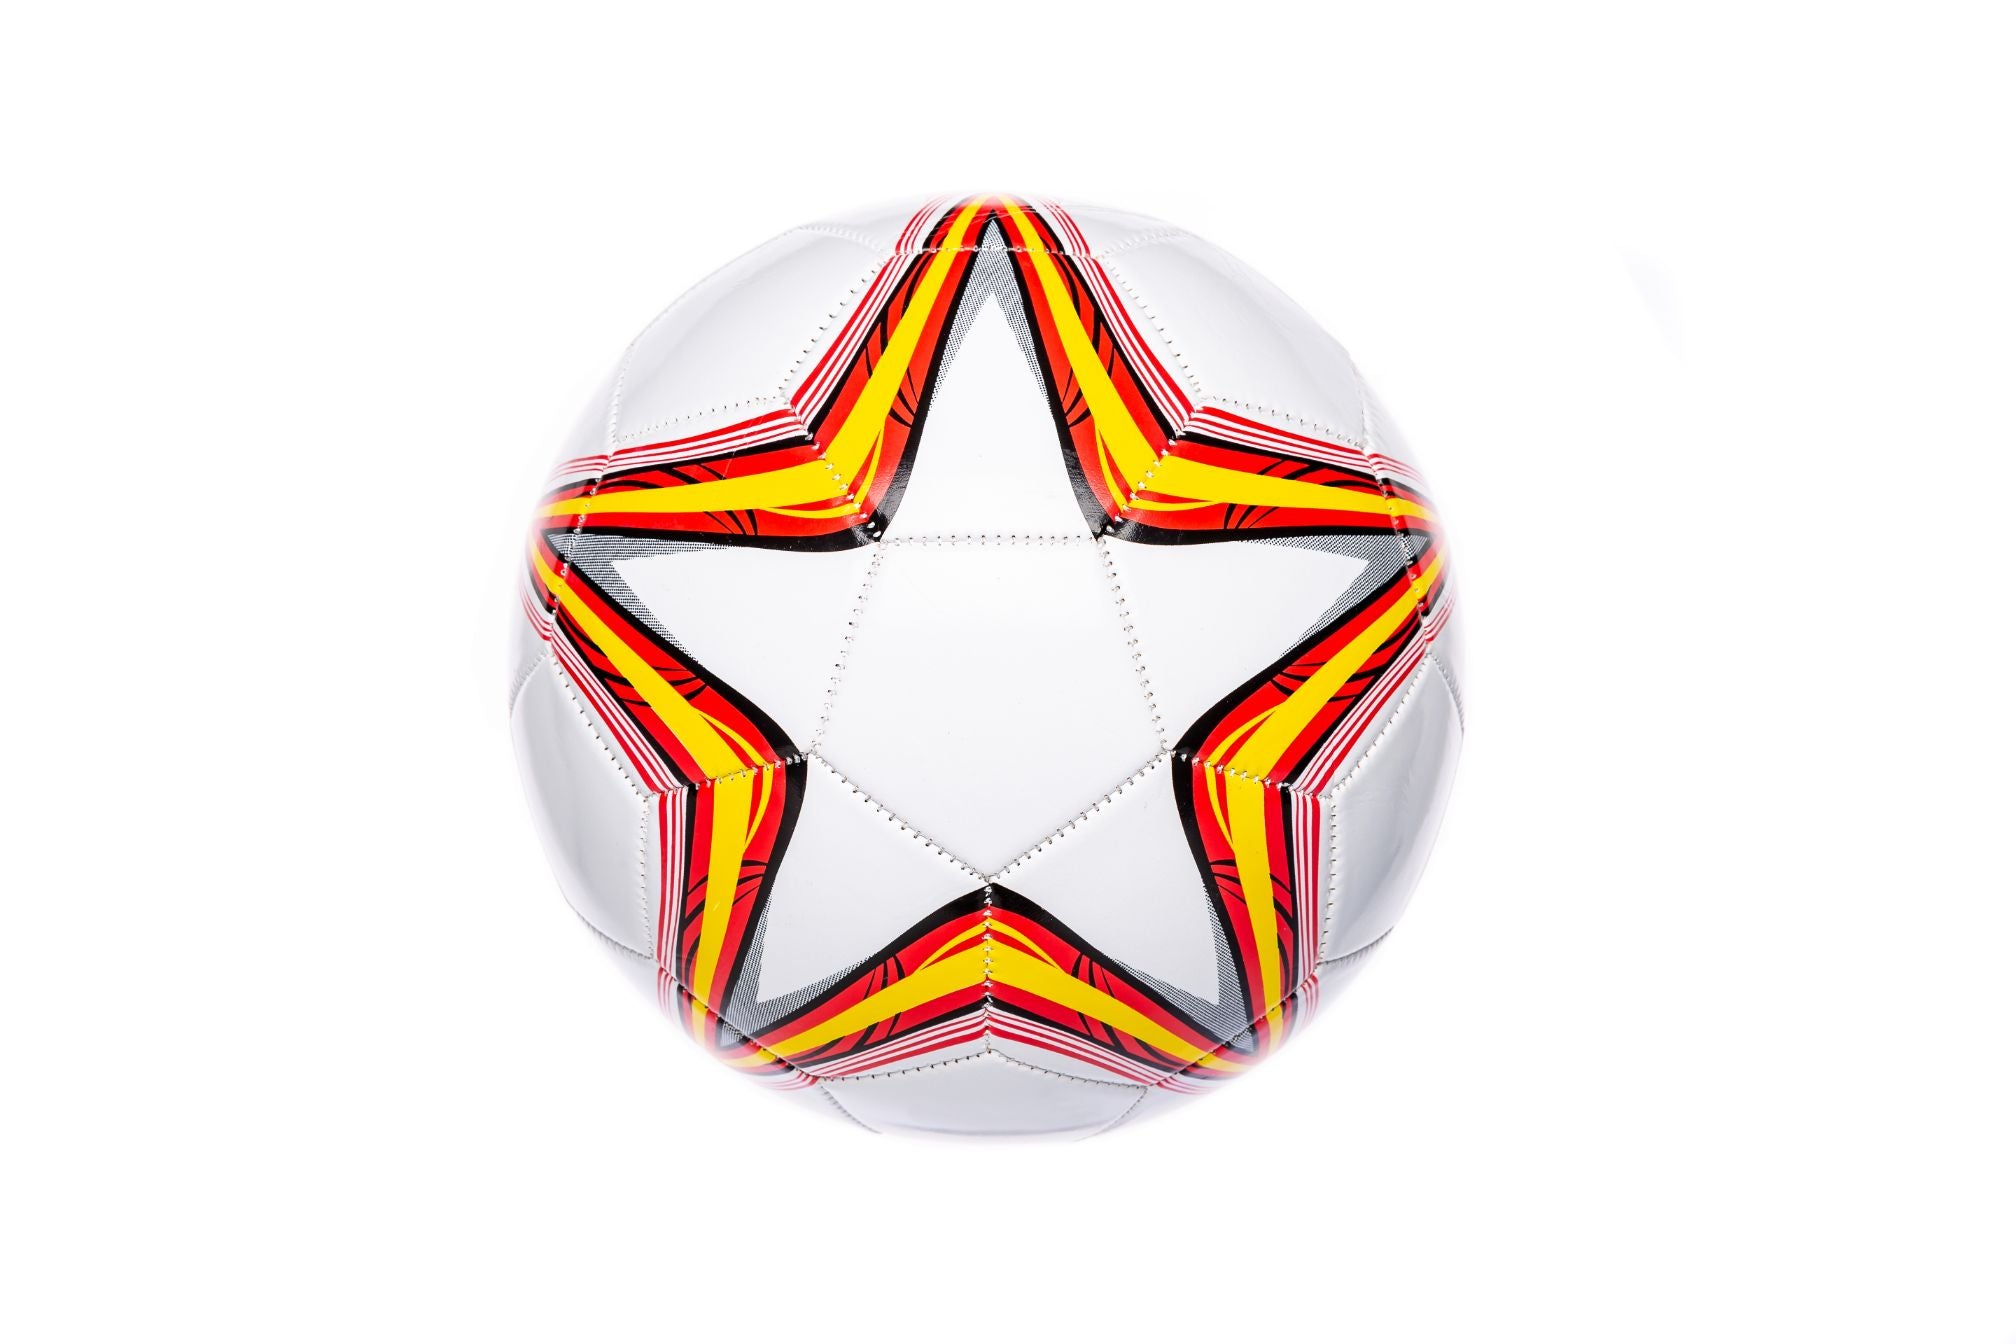 (Improved Quality) Western Star Custom Graphics Official Size 4 and Size 5 Soccer Balls